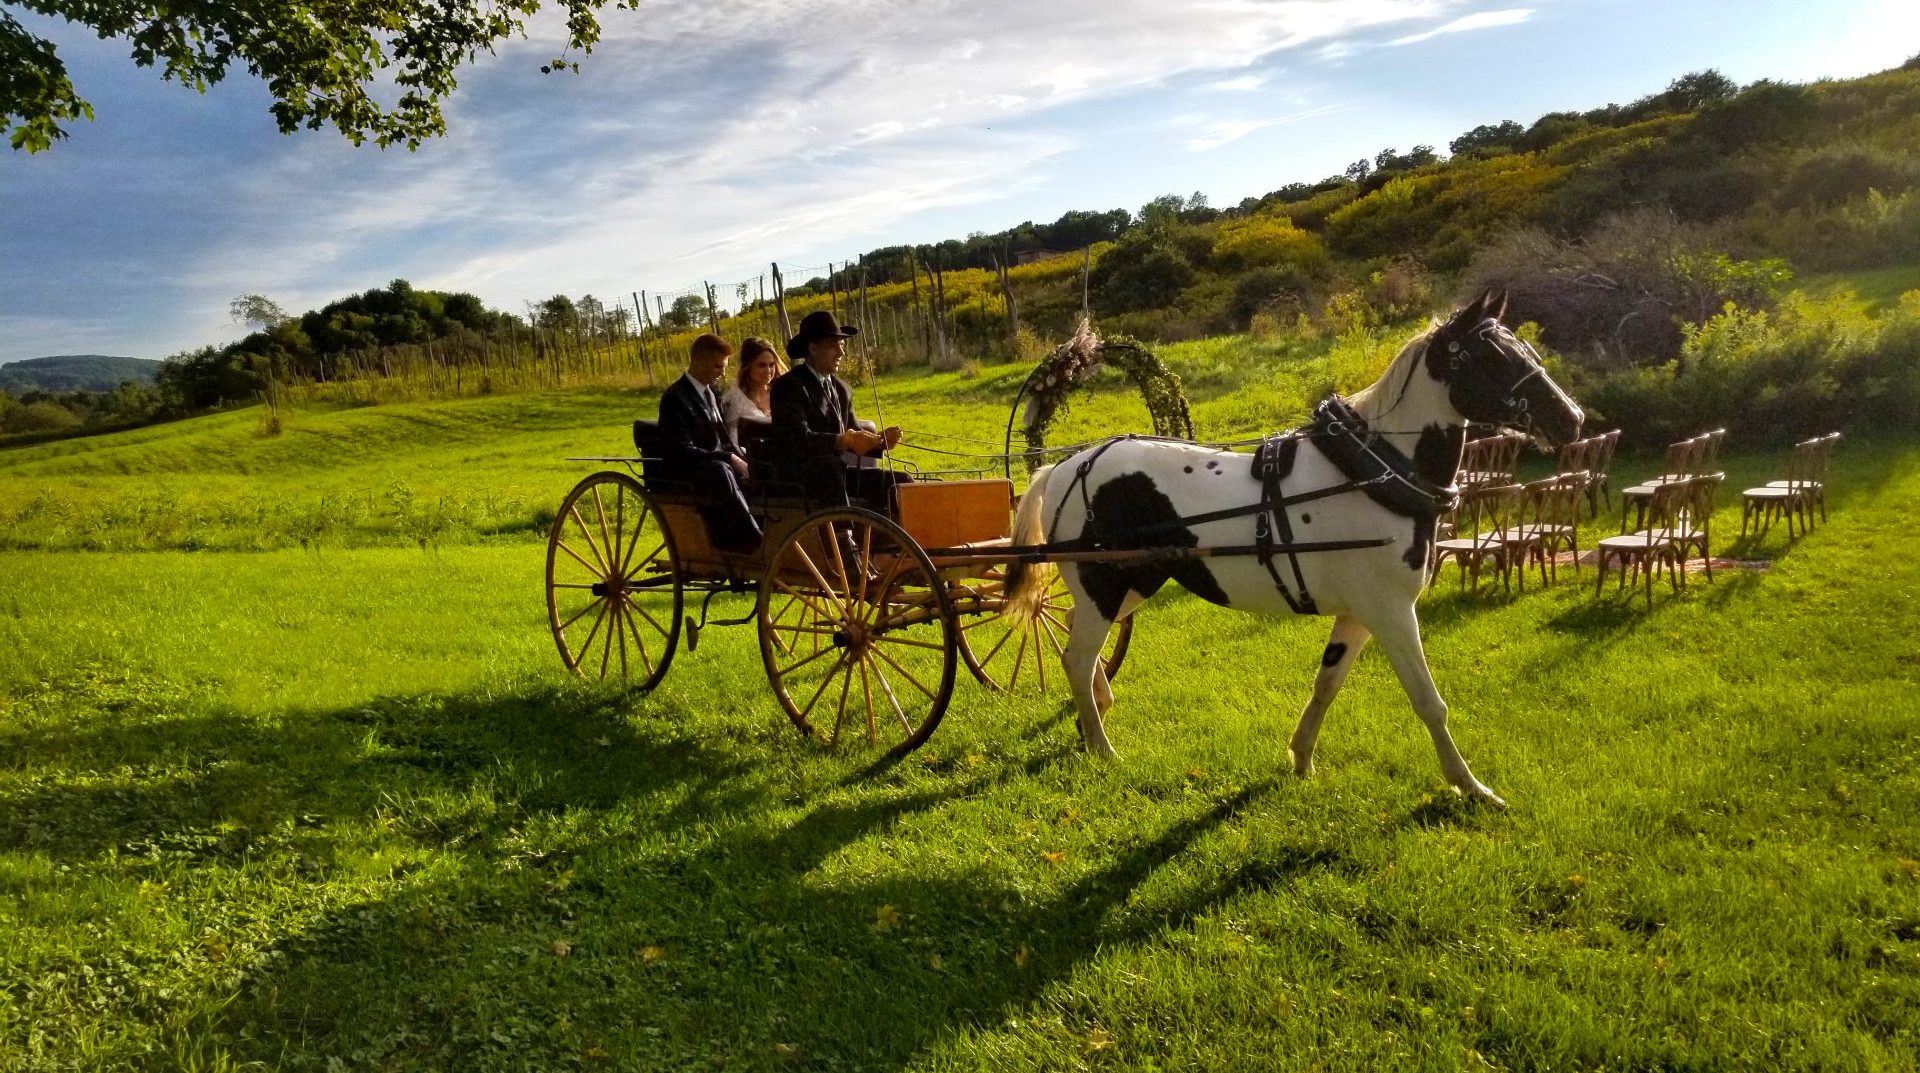 Bride and Groom, Horse and Carriage Moving